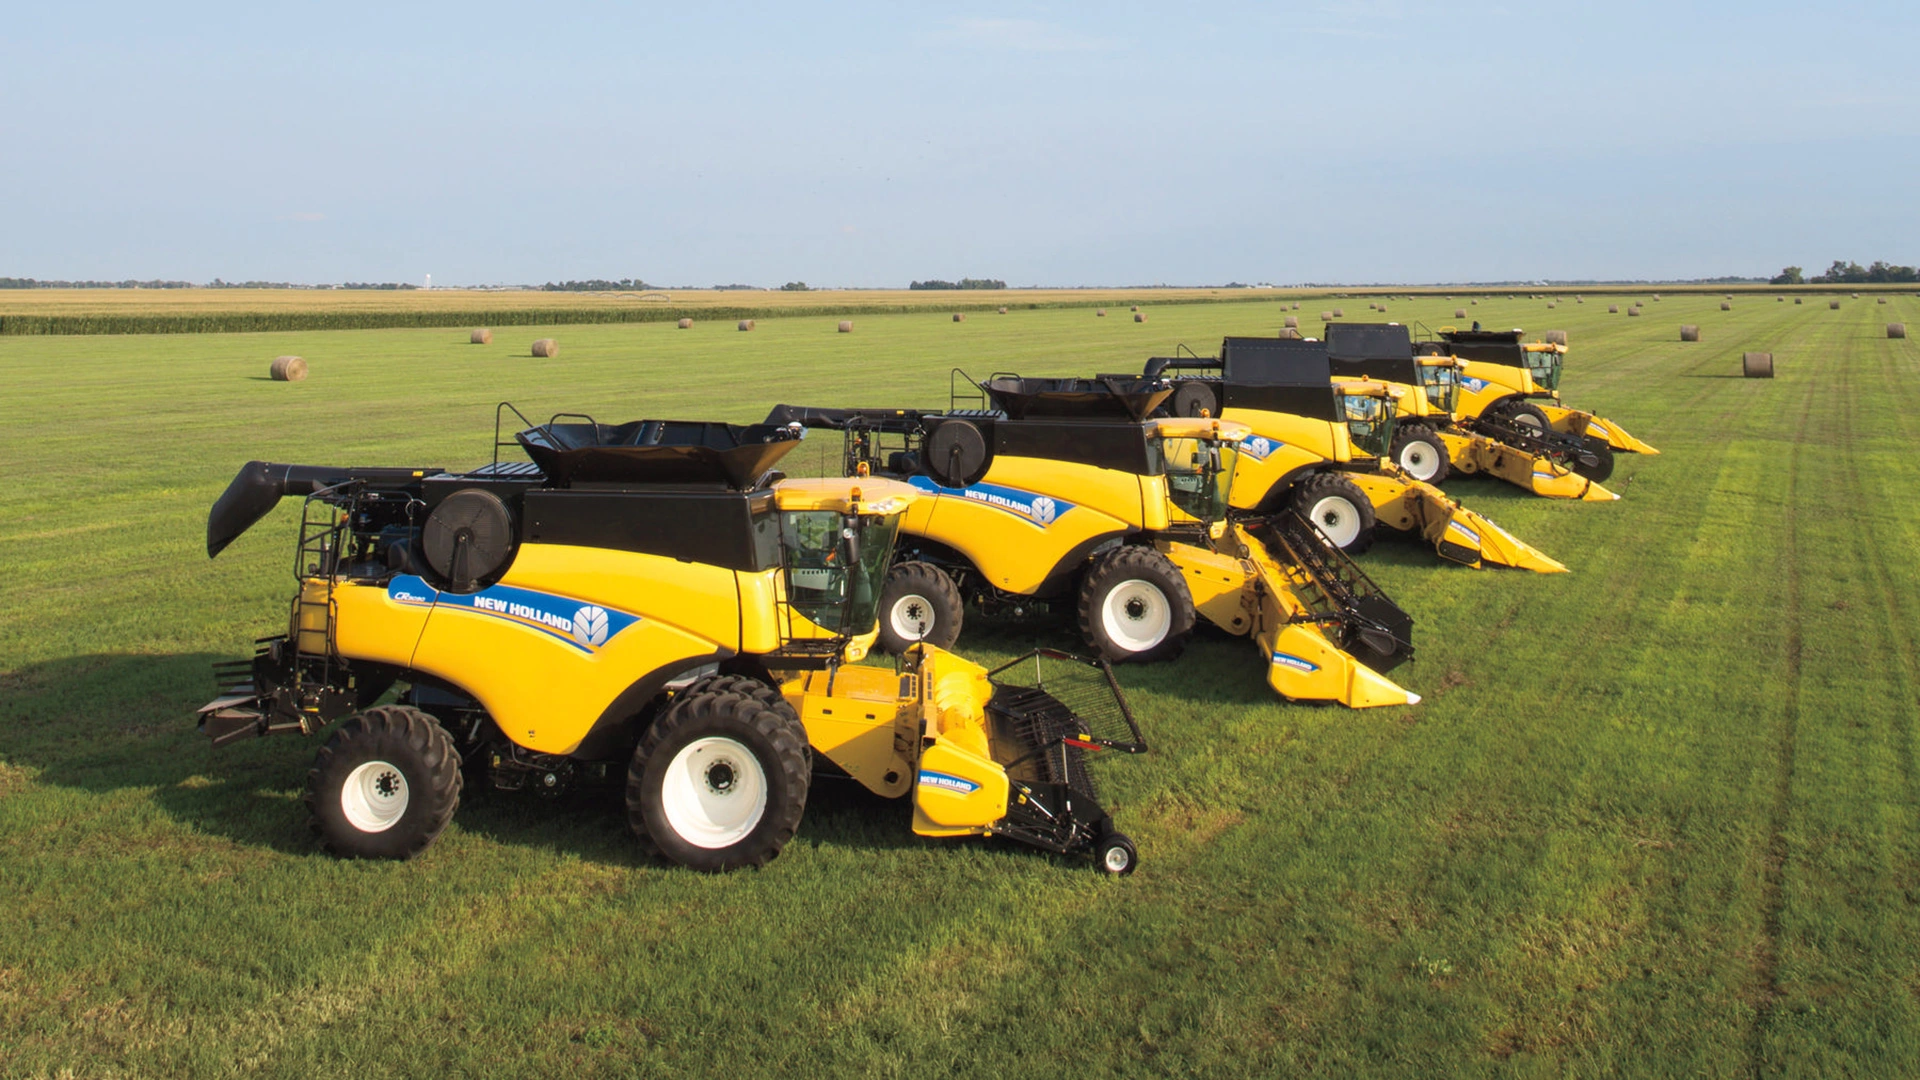 Combine harvesters with Maize Headers